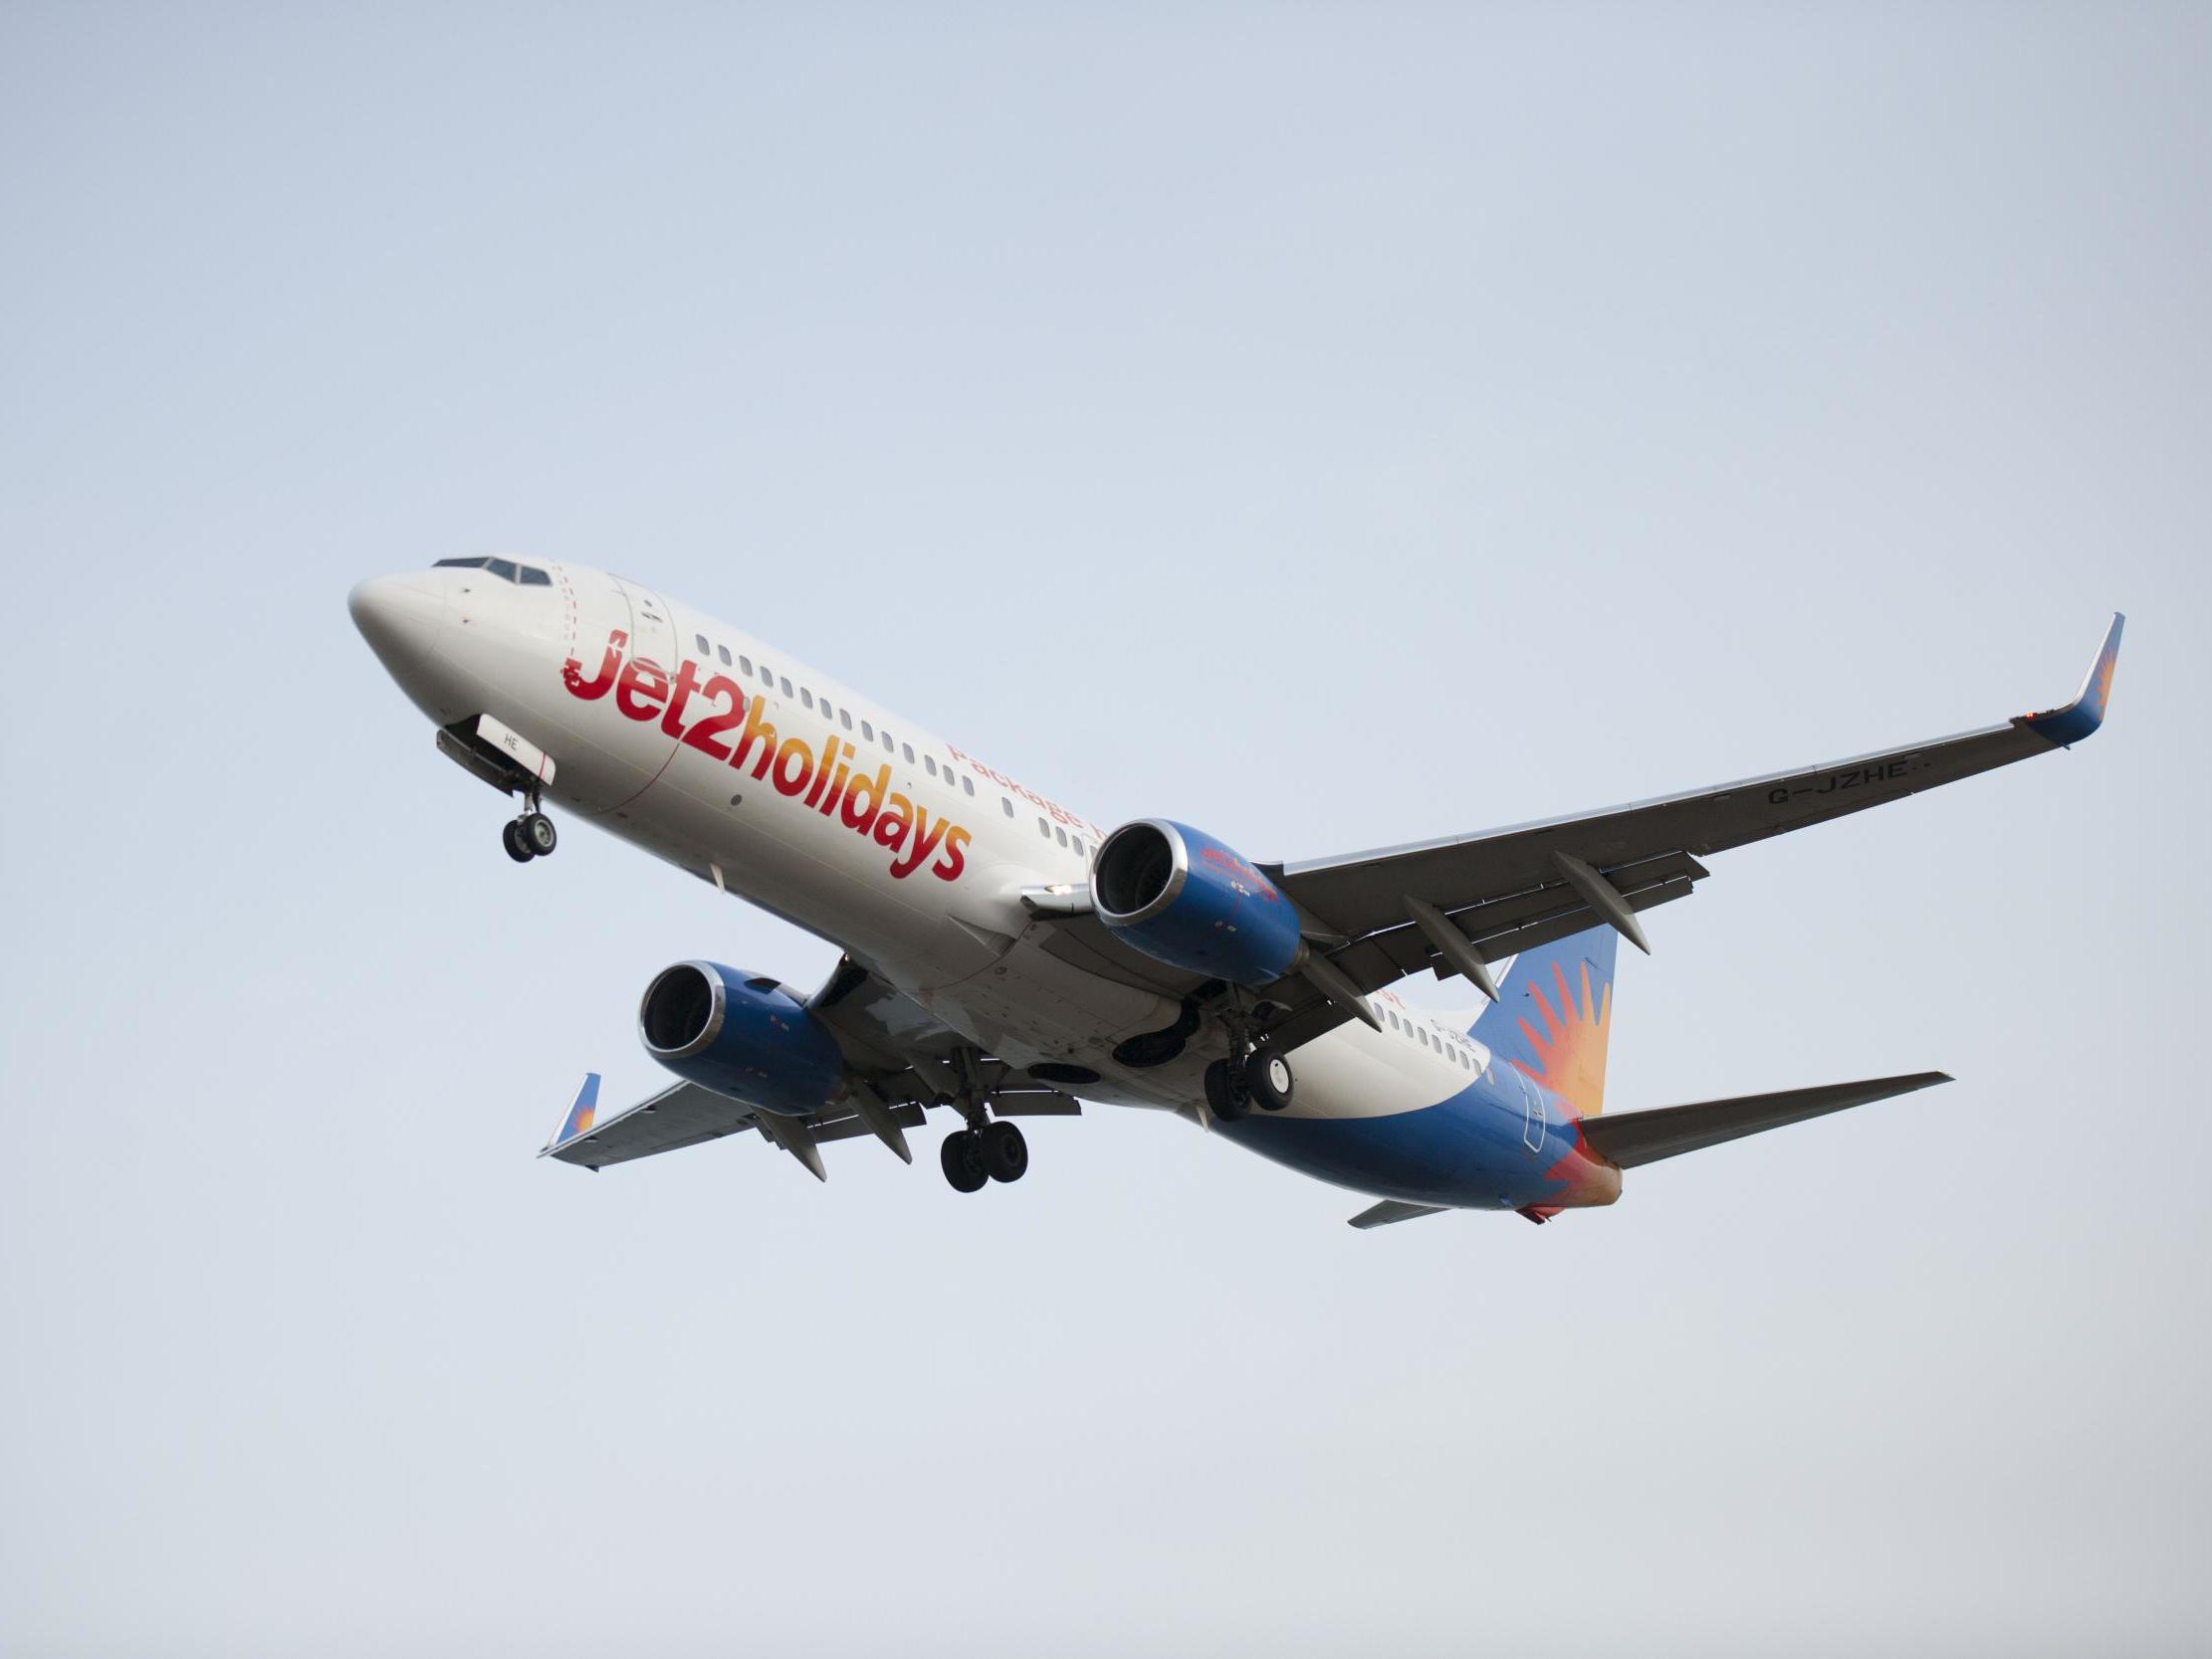 A Jet2 flight was forced to divert to Greece on Wednesday